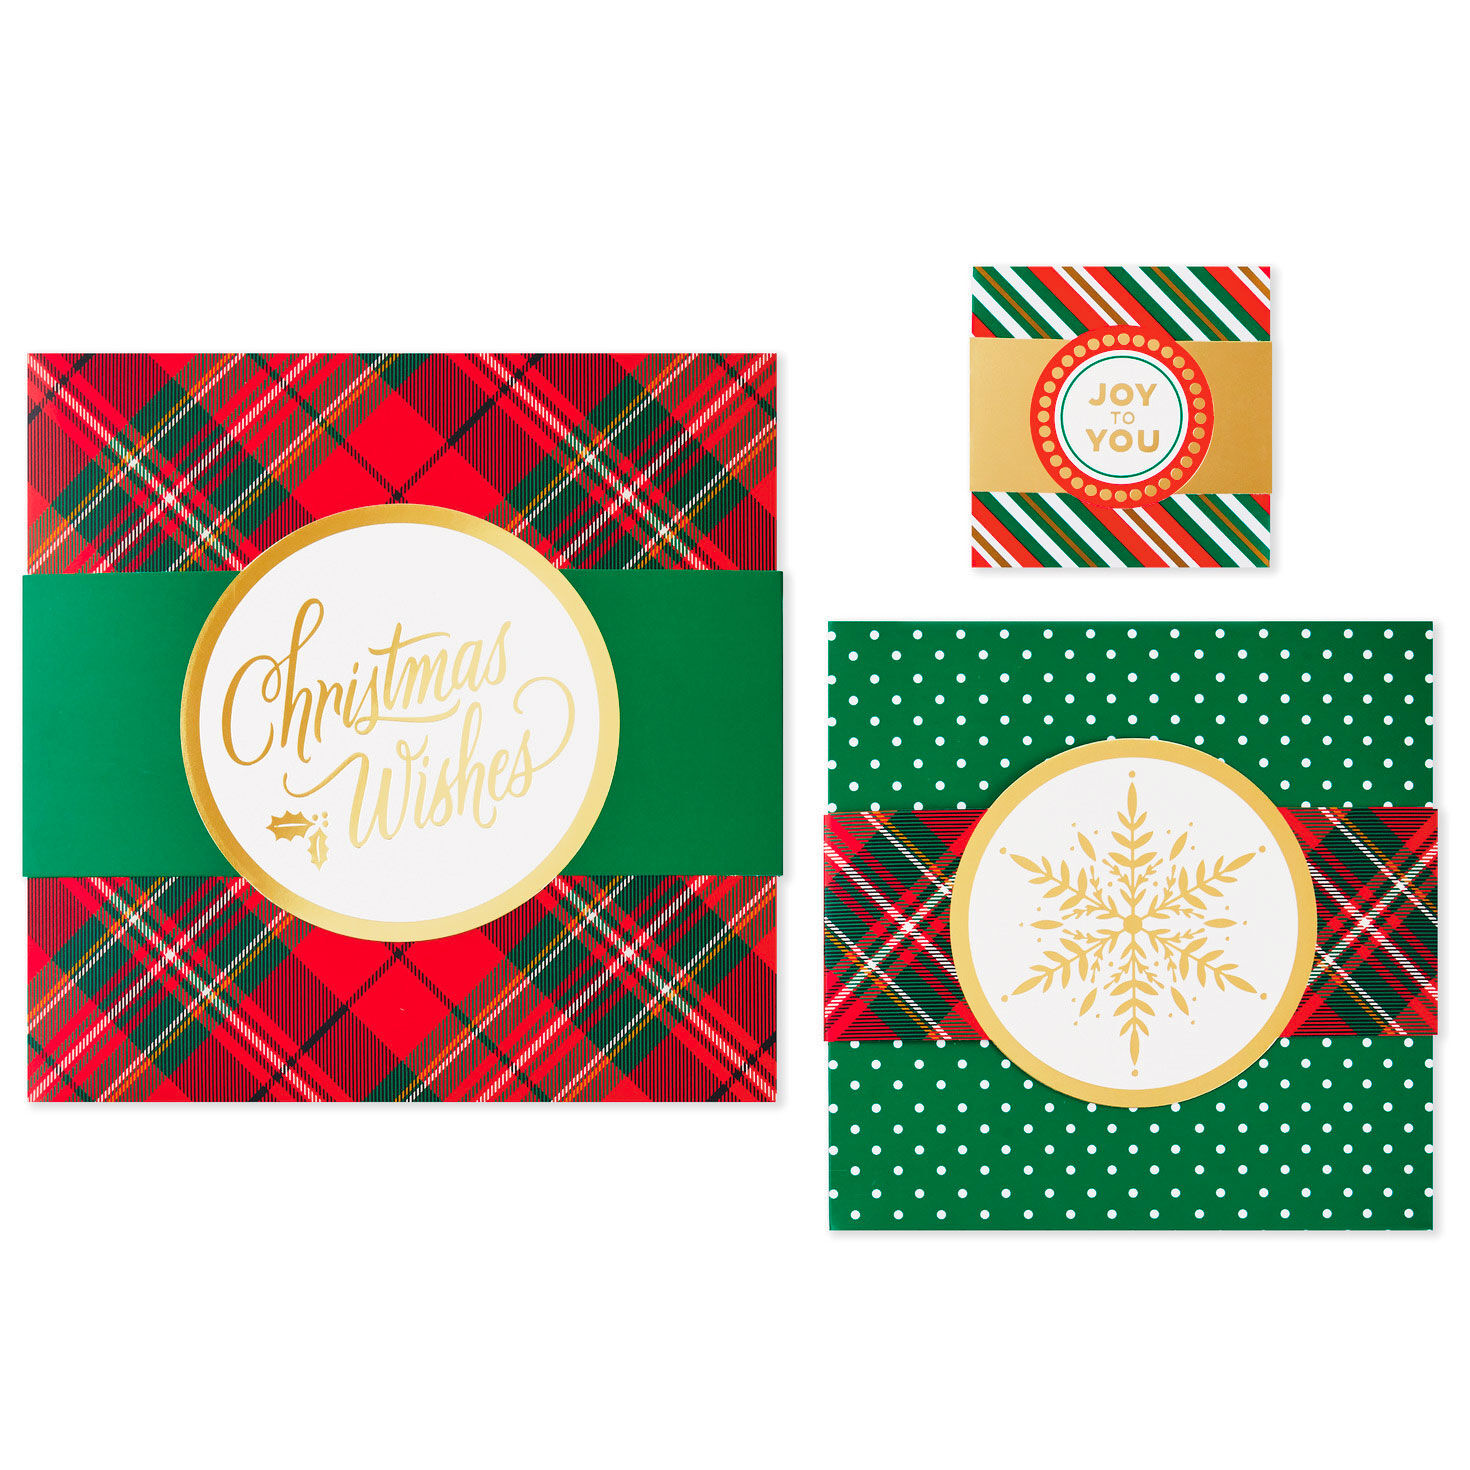 Joy to You 3-Pack Christmas Gift Boxes, Assorted Sizes and Designs for only USD 12.99 | Hallmark